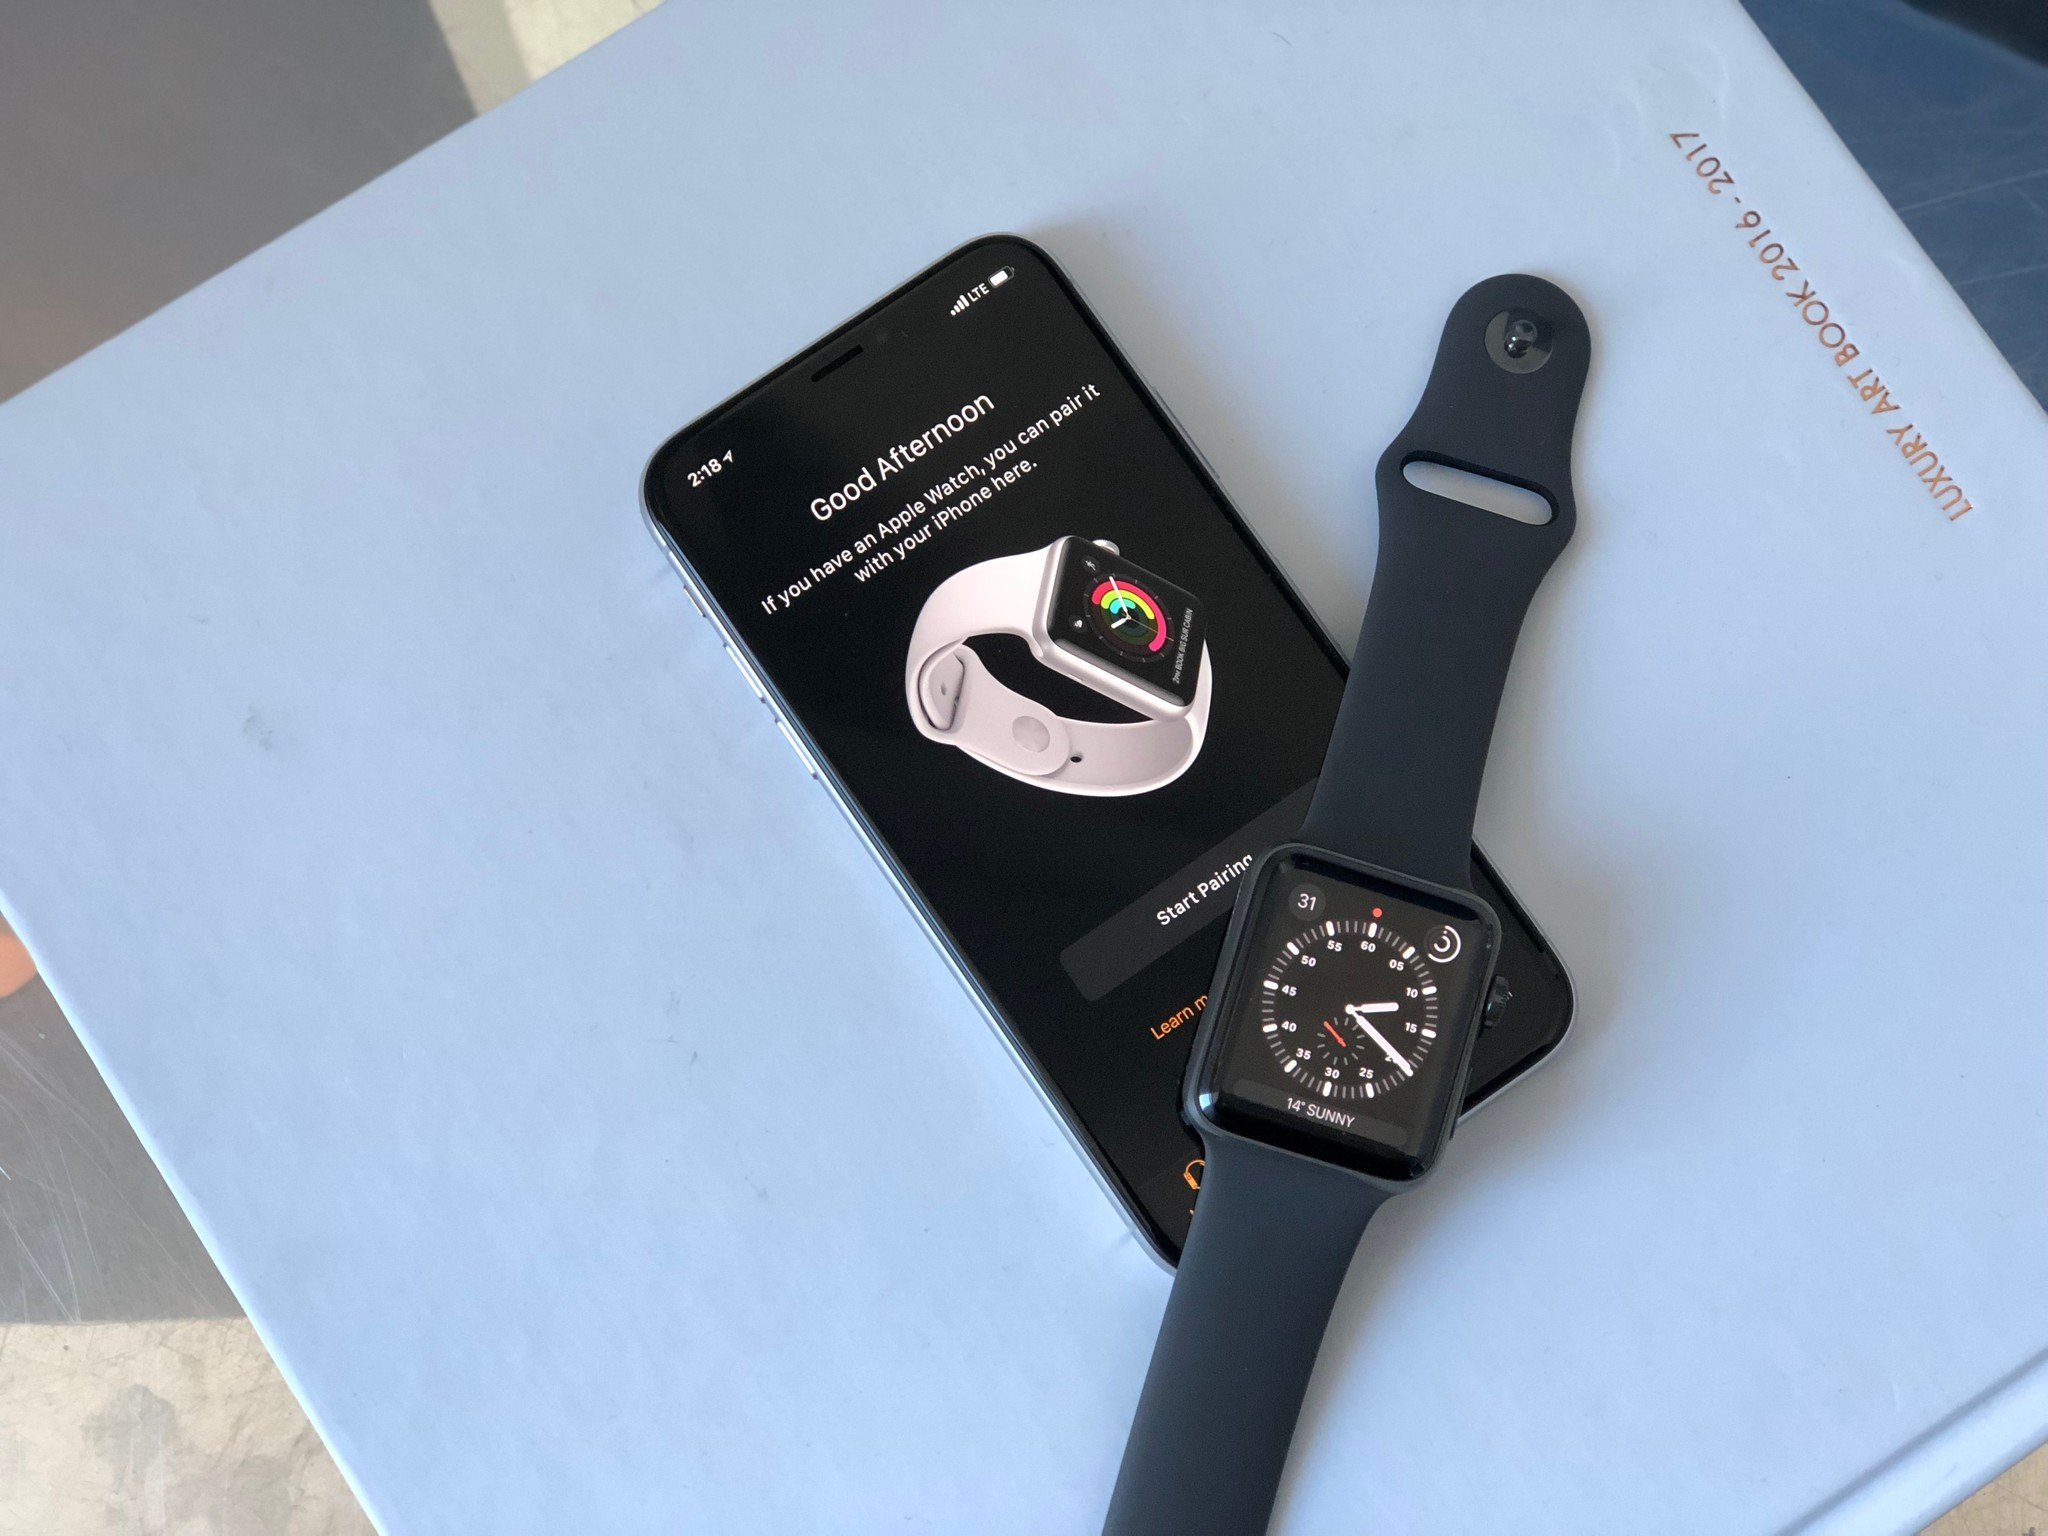 How to manage your iCloud account on Apple Watch